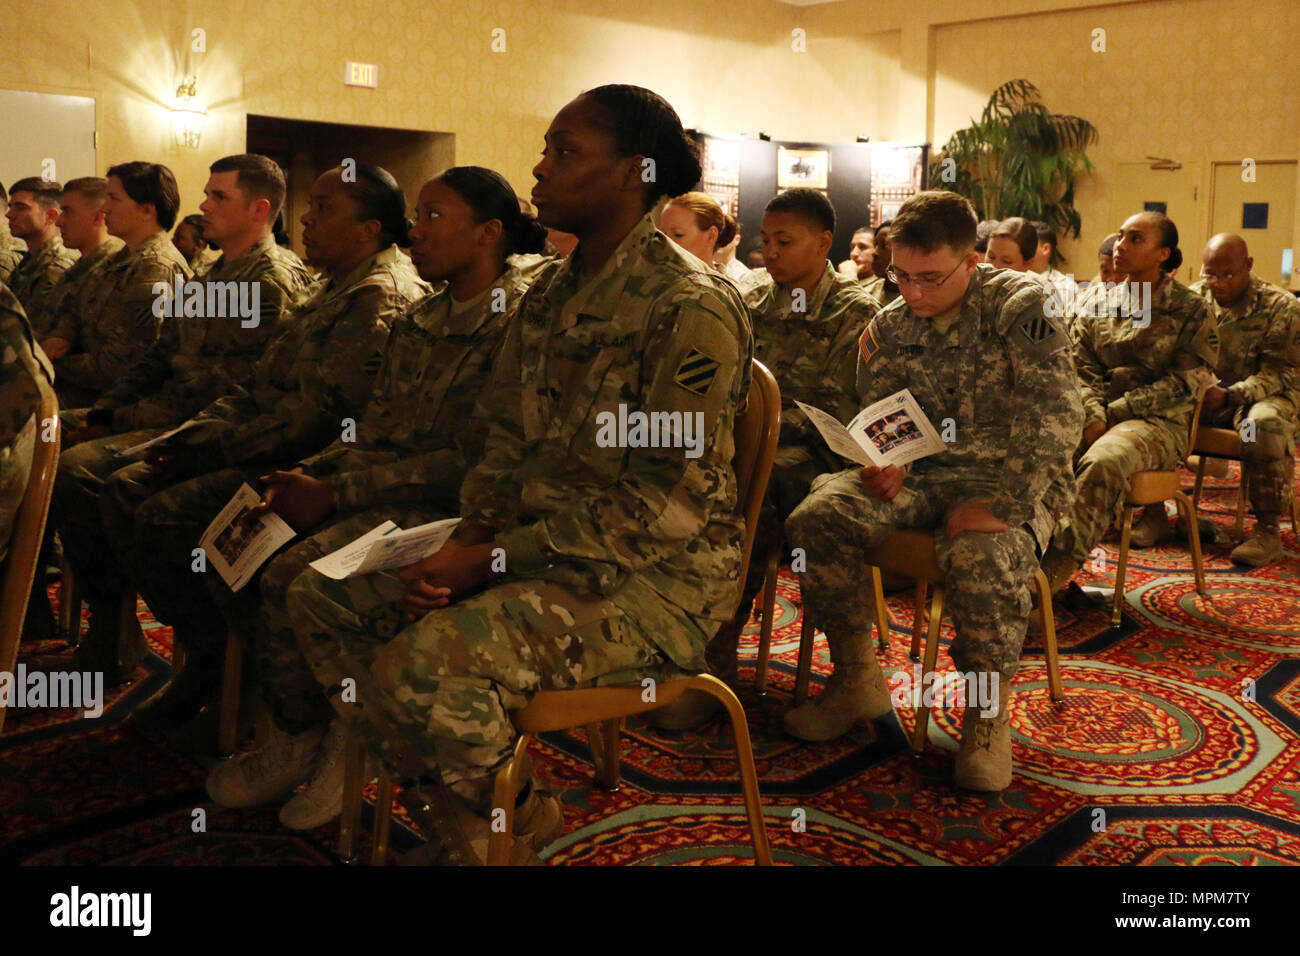 Soldiers of 3rd Infantry Division listen to the guest speaker at a Women’s History Month observance March 22, 2017 at Fort Stewart, Ga. This year’s theme was “Honoring trailblazing women.” (U.S. Army photo by Staff Sgt. Candace Mundt/Released) Stock Photo